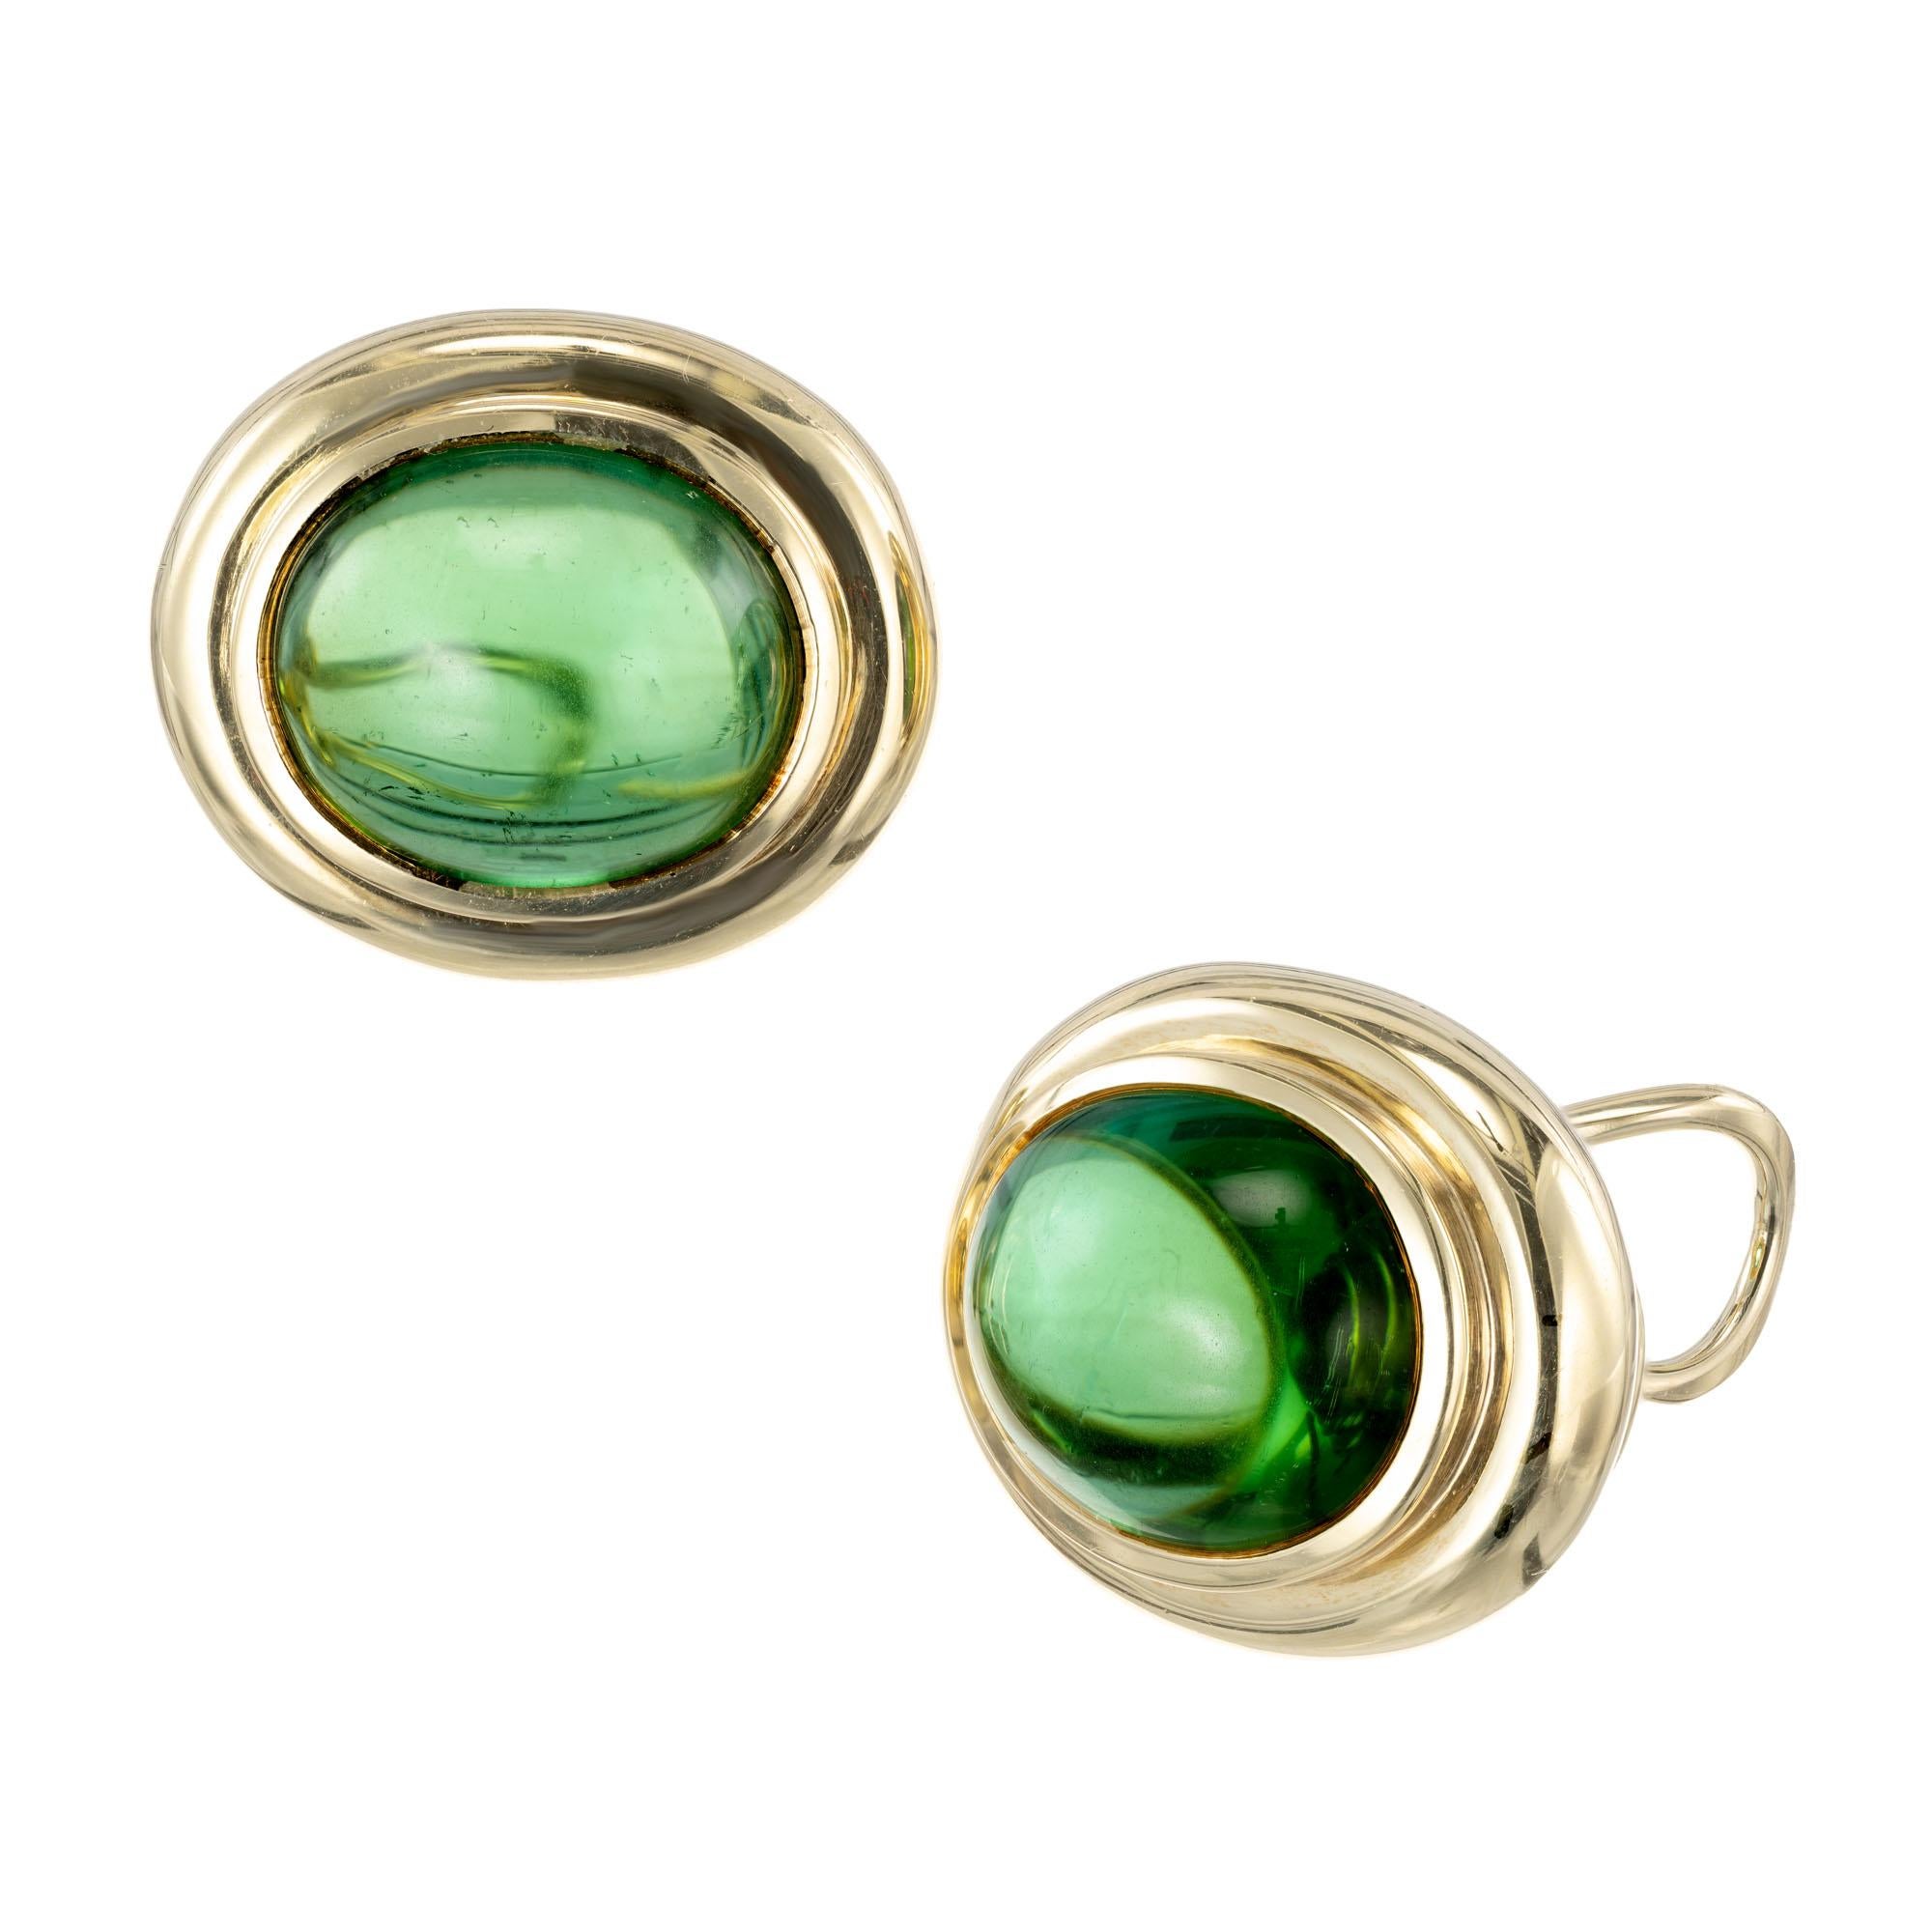 Tiffany & Co green oval tourmaline clip post  lever back 18k yellow gold earrings

2 oval green cabochon tourmaline, approx. .15cts VS
18k yellow gold 
Stamped: 18k
Hallmark: Tiffany + Co 1982
18.3 grams
Top to Bottom: 20.36mm or .80 Inches
Width: